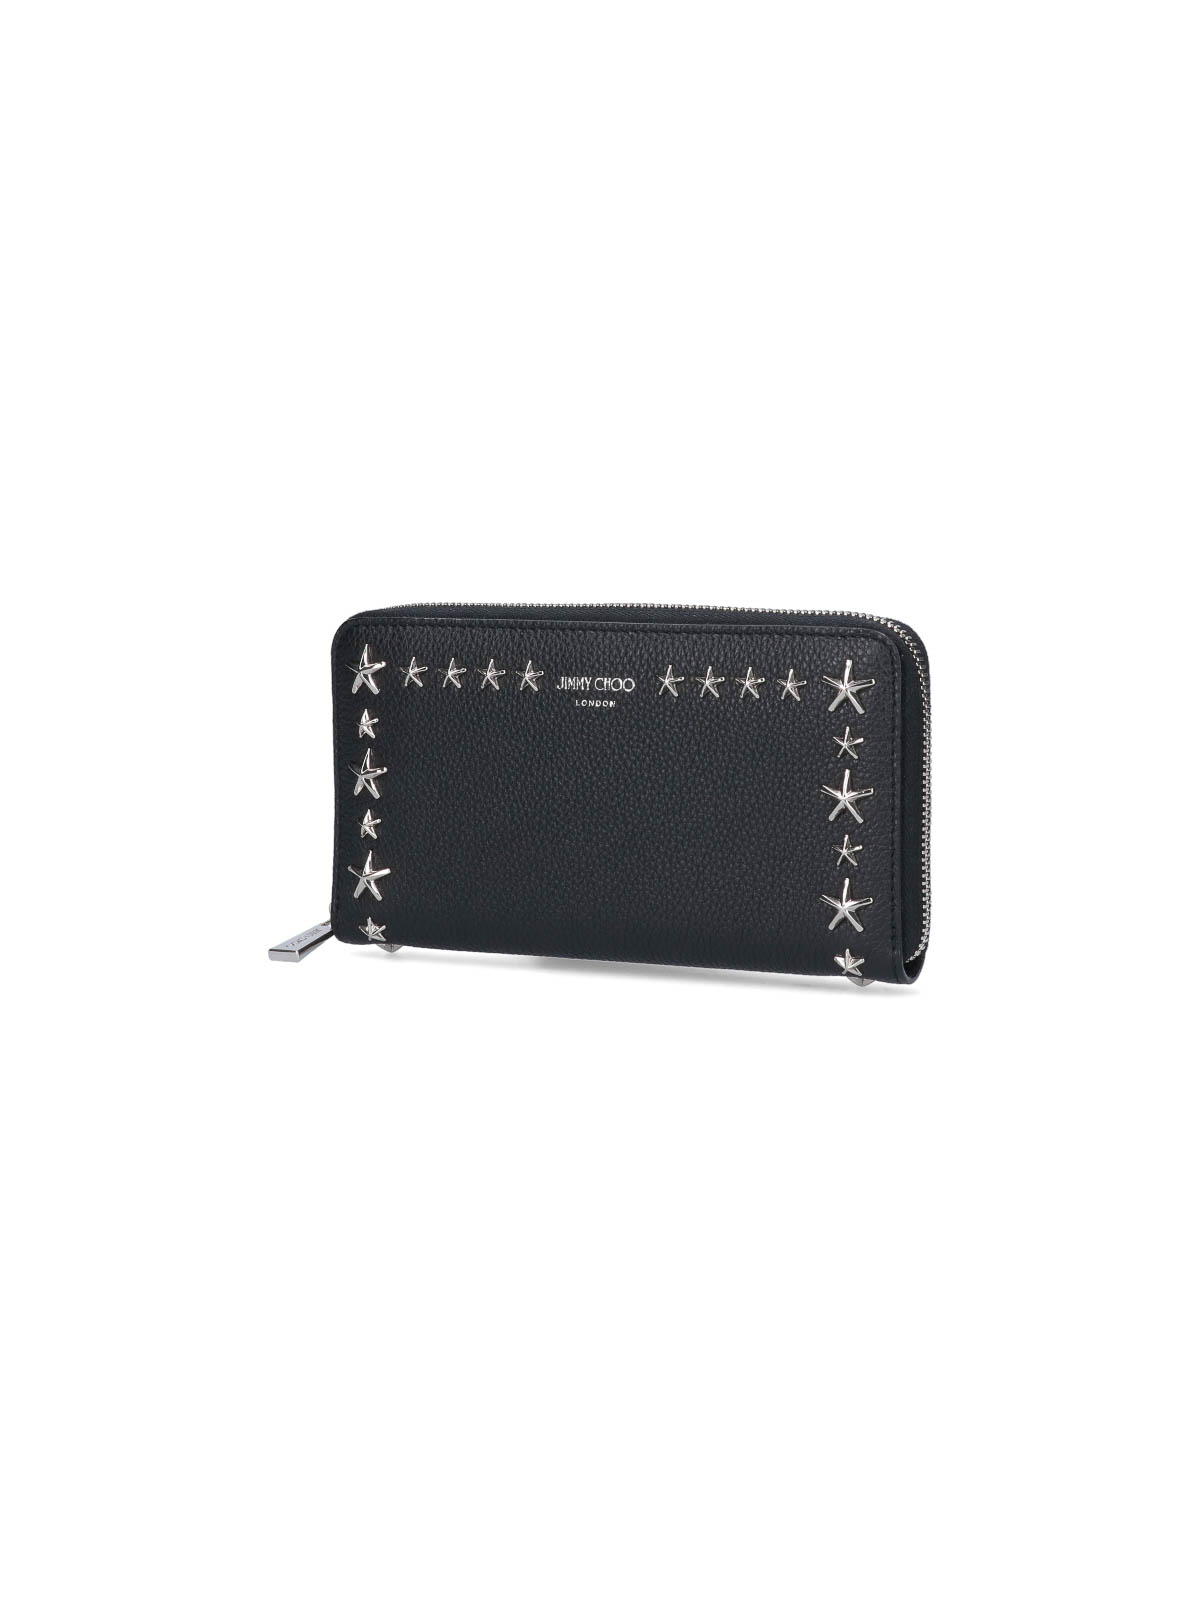 Champagne Clutch by Jimmy Choo for rent online | FLYROBE